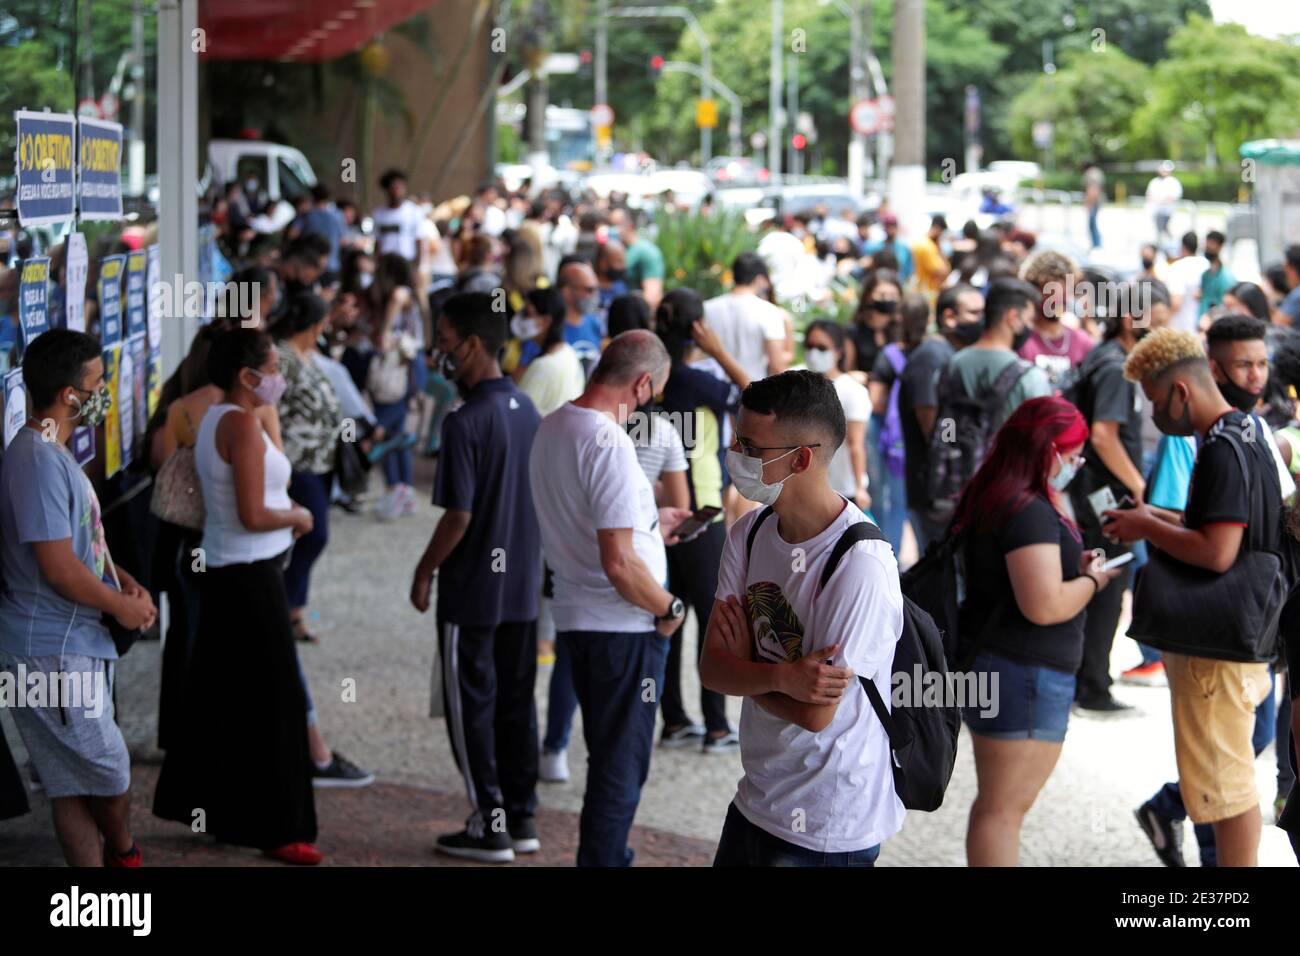 Students and their families gather before the beginning of the ENEM, Exame Nacional do Ensino Medio (National High School Exam), during the outbreak of the coronavirus disease (COVID-19), at UNIP Vergueiro test site in Sao Paulo, Brazil January 17, 2021. REUTERS/Amanda Perobelli Stock Photo